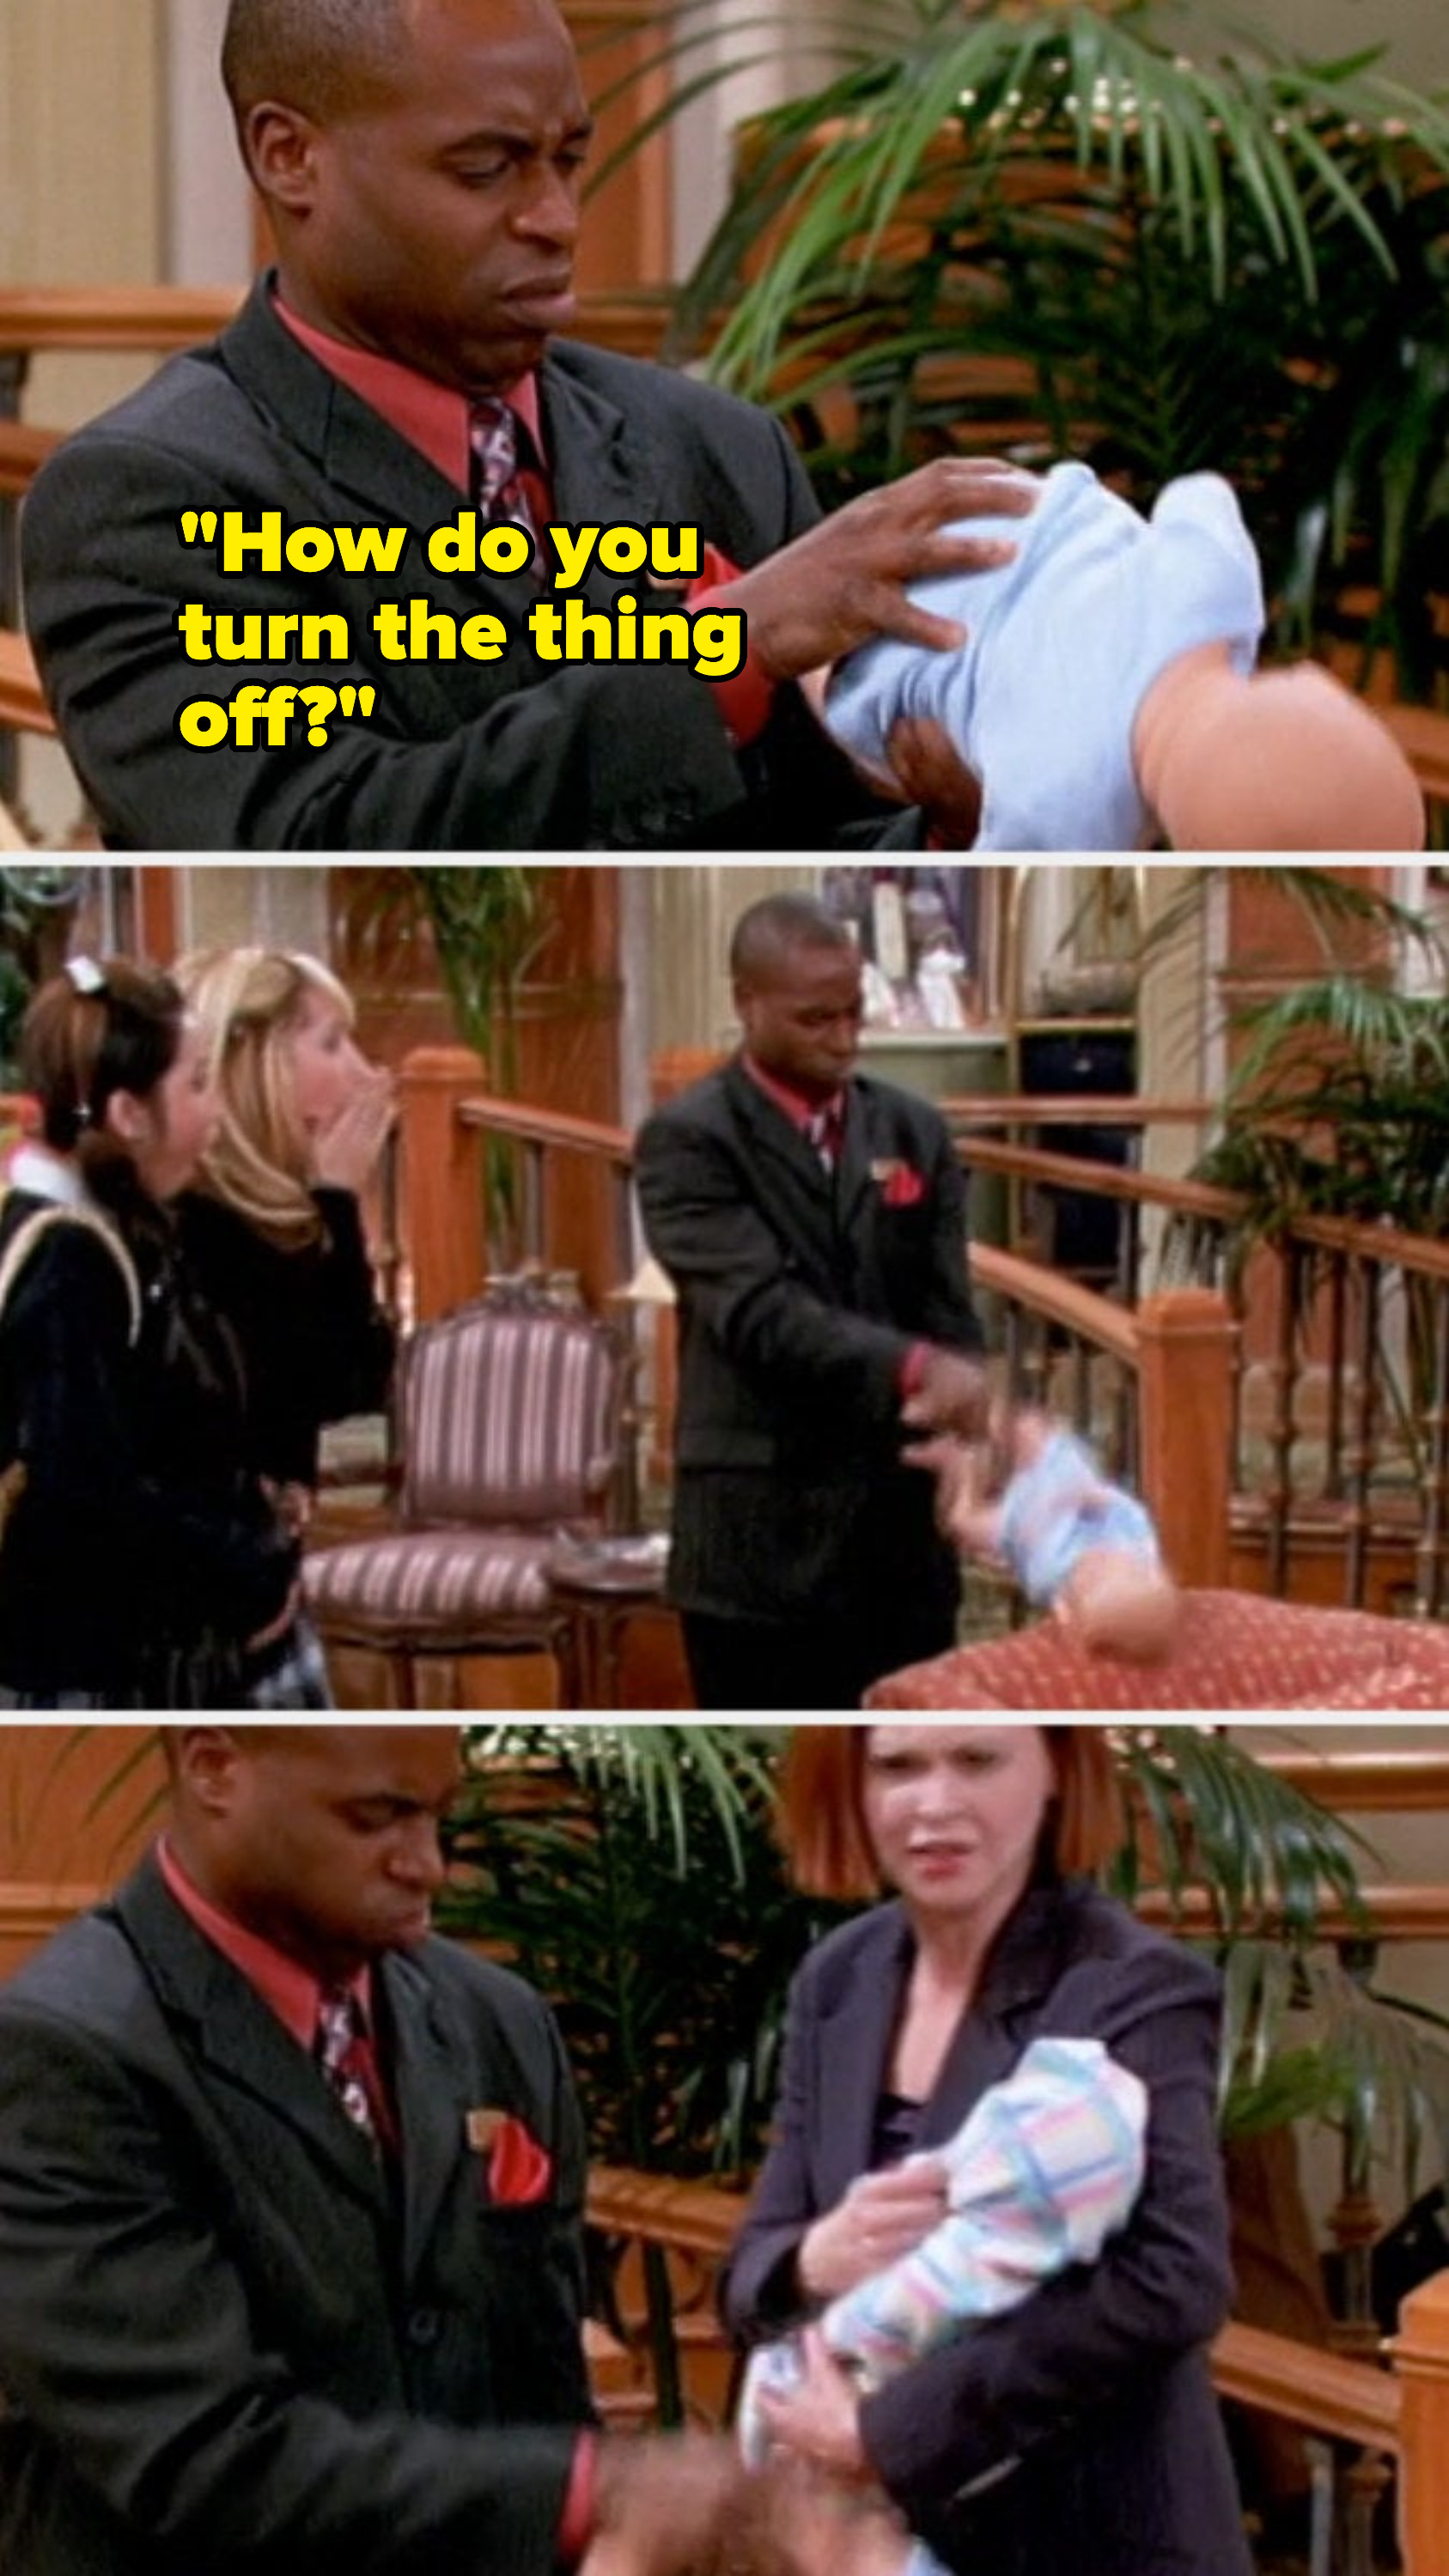 Mr. Moseby alarms a hotel guest when he throws a crying baby doll against a chair